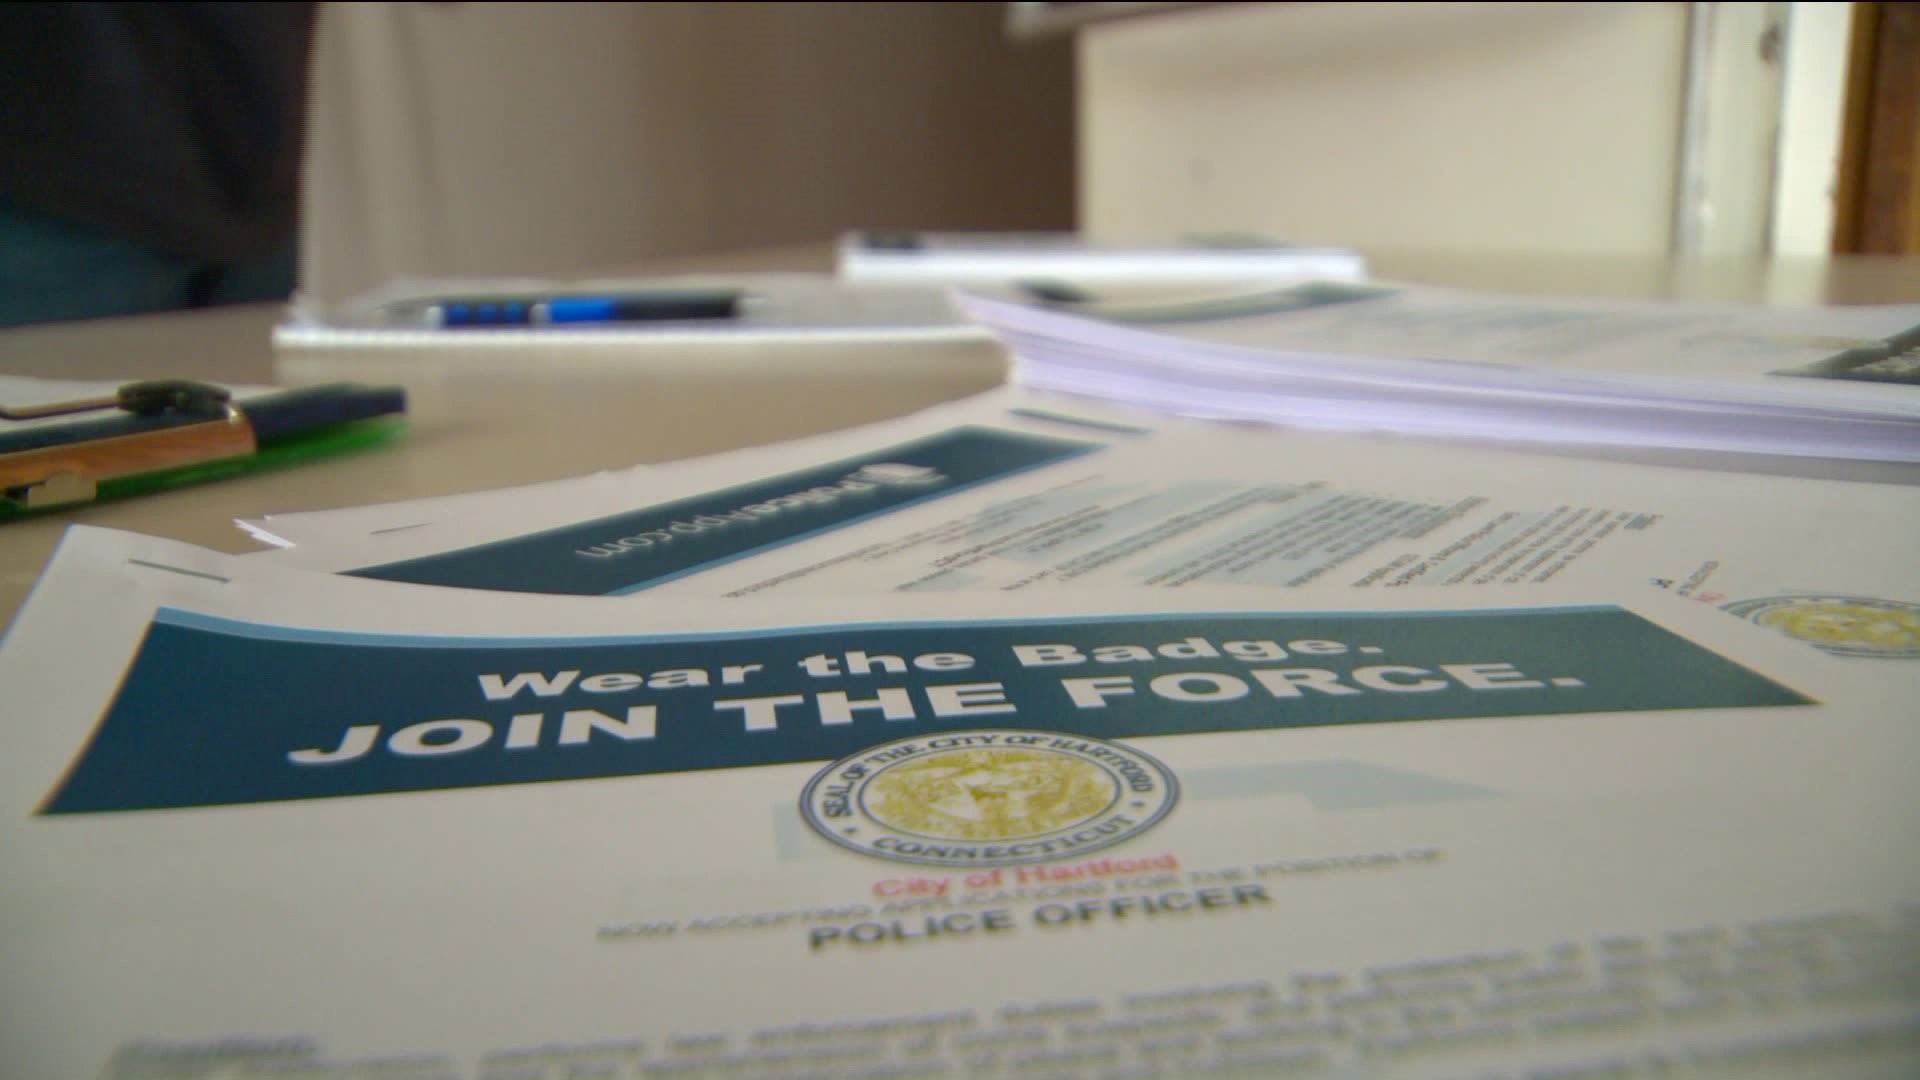 Hartford Police Department transparent to applicants looking to join the force